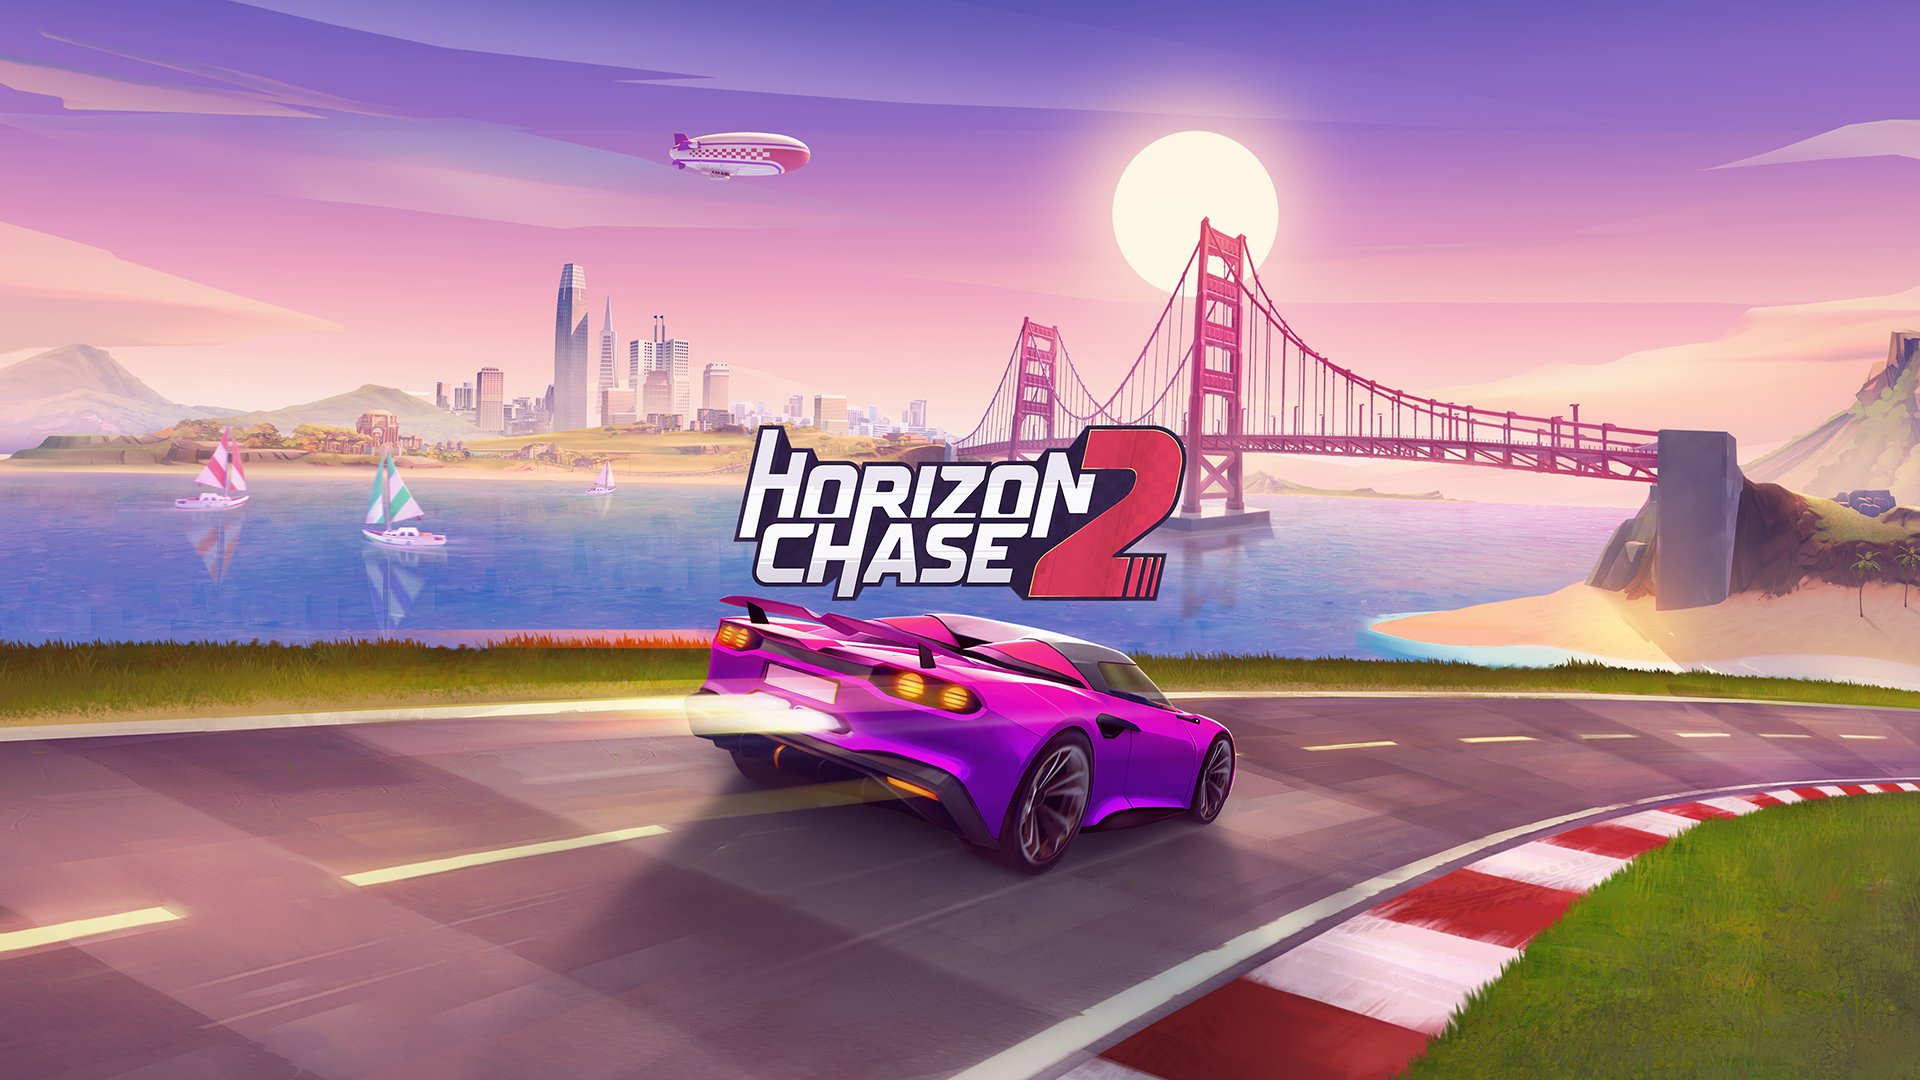 Horizon Chase 2 is expanding its horizons: On 30 May, the game will be available on both PlayStation and Xbox generations